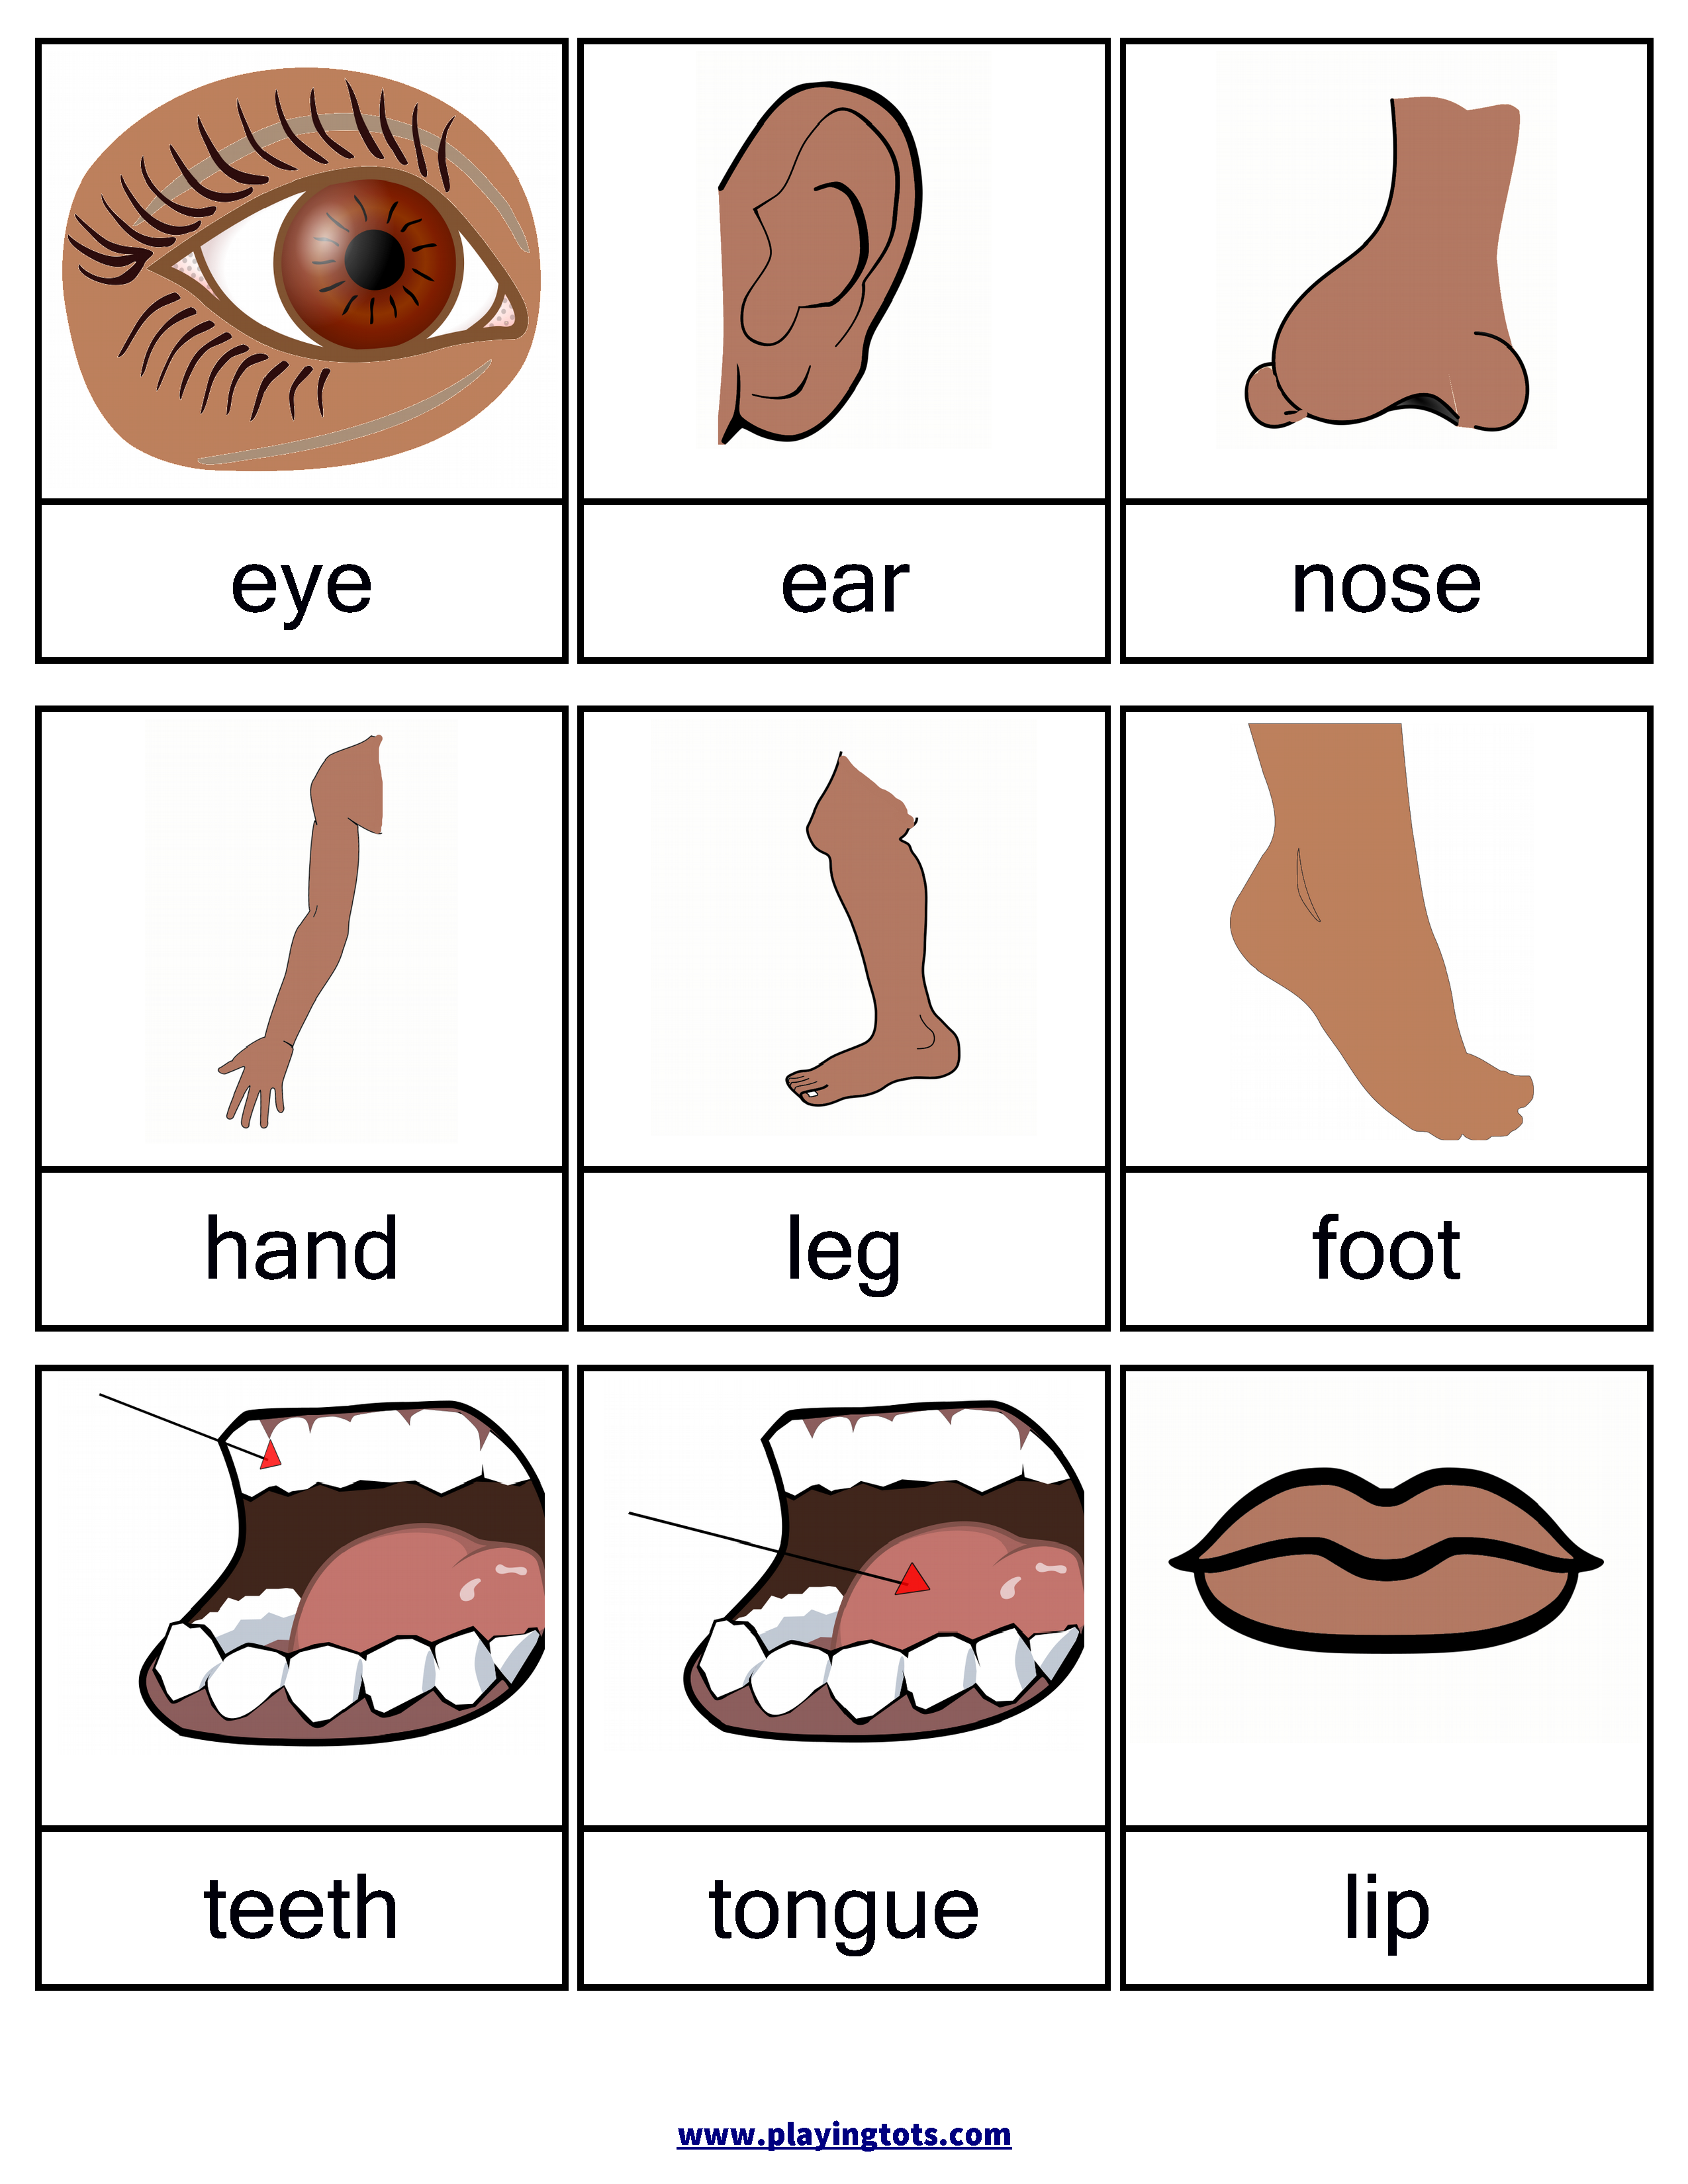 Free Printable Body Parts Flashcards Free Printable For Learning 